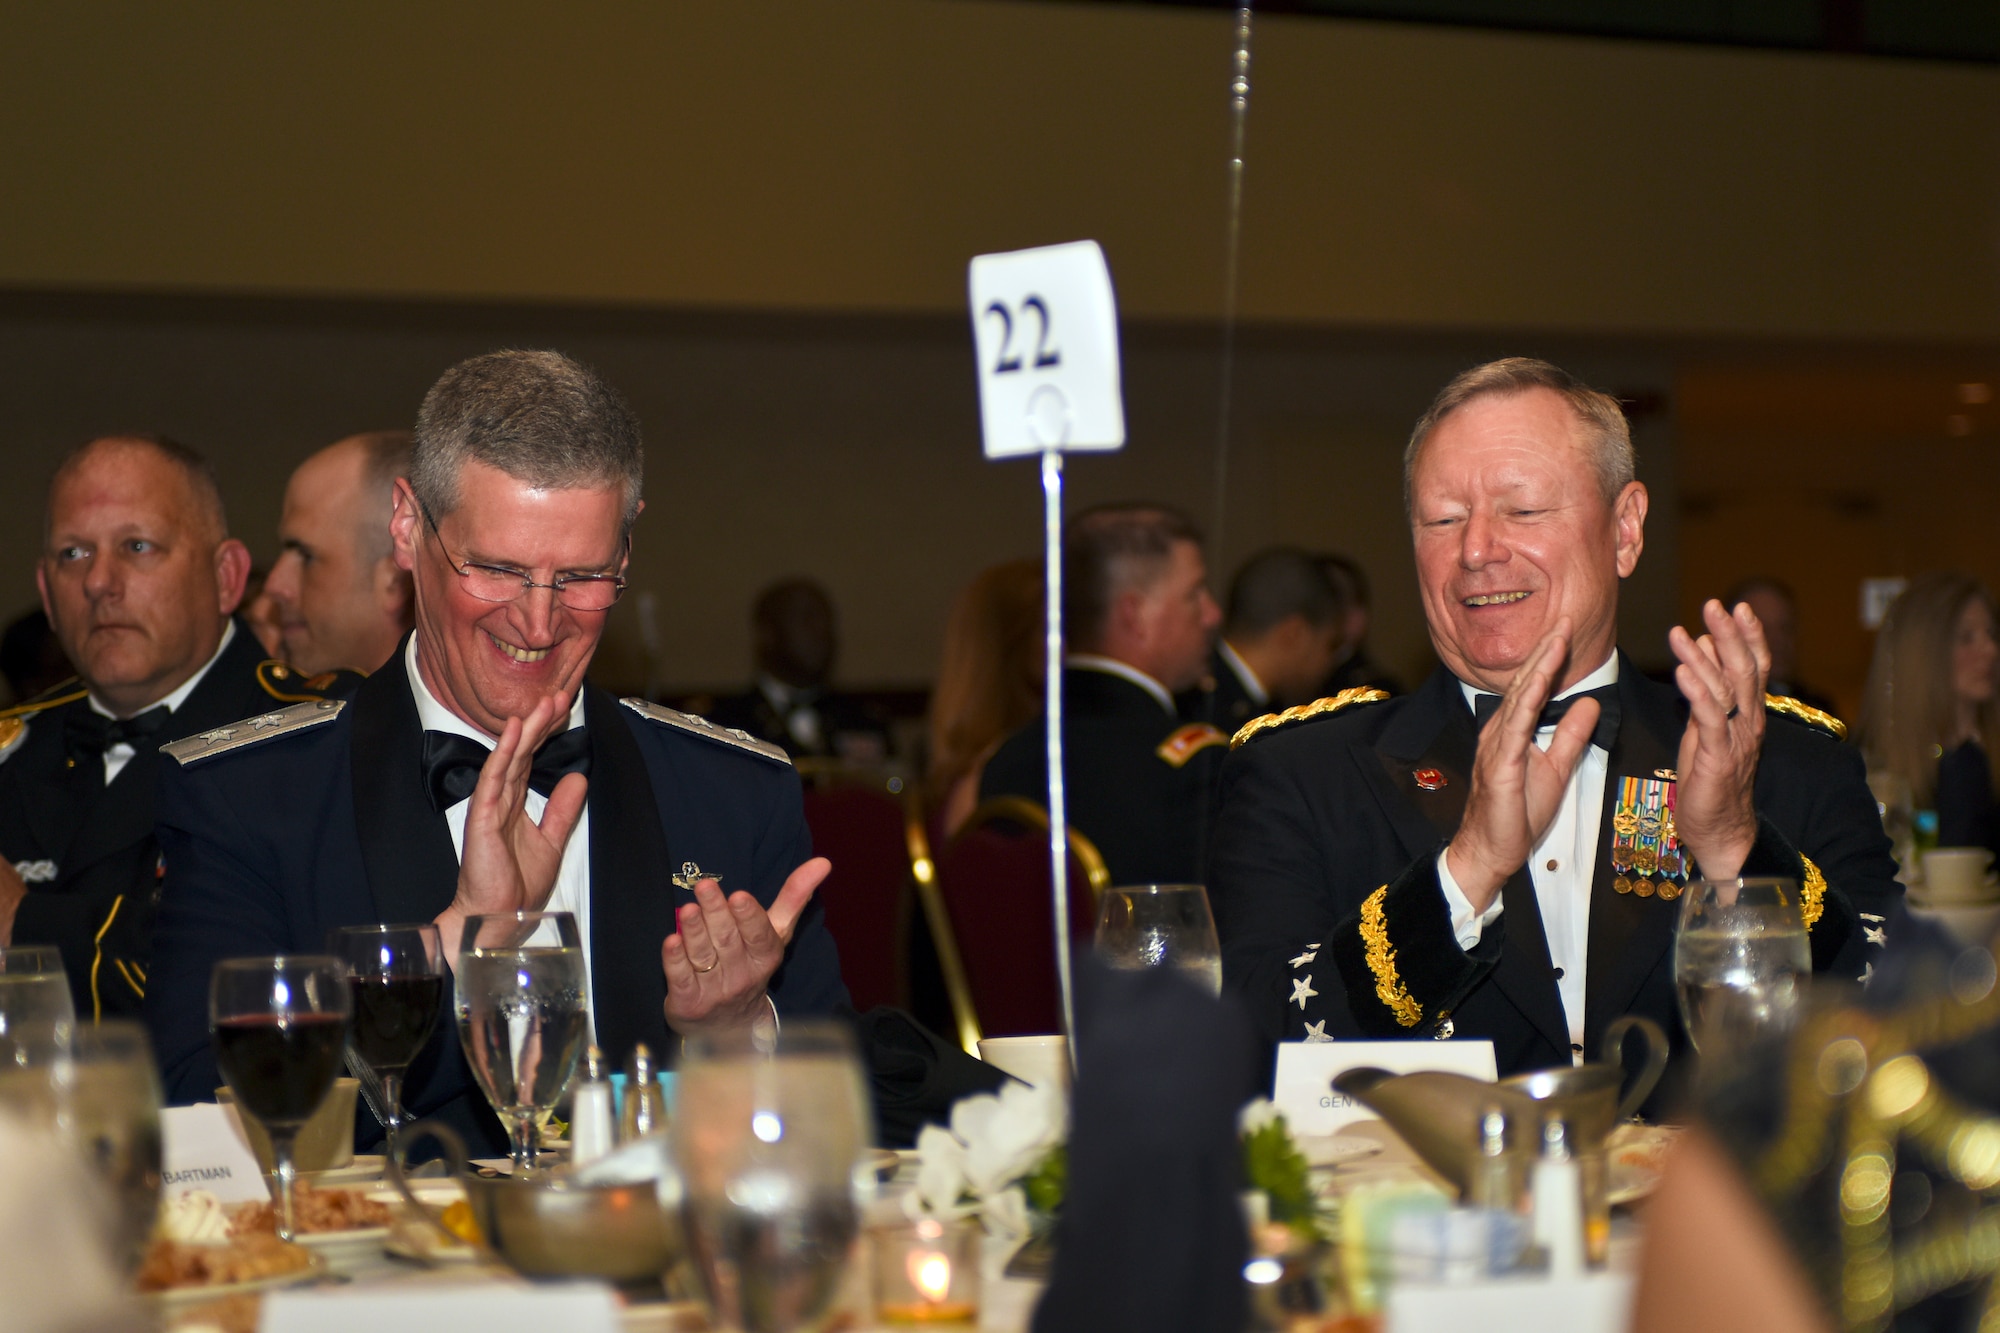 U.S. Air Force Maj. Gen. Mark E. Bartman (left), Ohio adjutant general, and U.S. Army Gen. Frank J. Grass (right), Chief of the National Guard Bureau, attended the Ohio National Guard Association and Ohio National Guard Enlisted Association Spring Dinner Dance, Columbus, Ohio, April 25, 2015. Gen. Grass was the guest speaker at the event which is held annually for association members in both the Air and Army National Guard. (U.S. National Guard photo by Senior Airman Wendy Kuhn/Released)